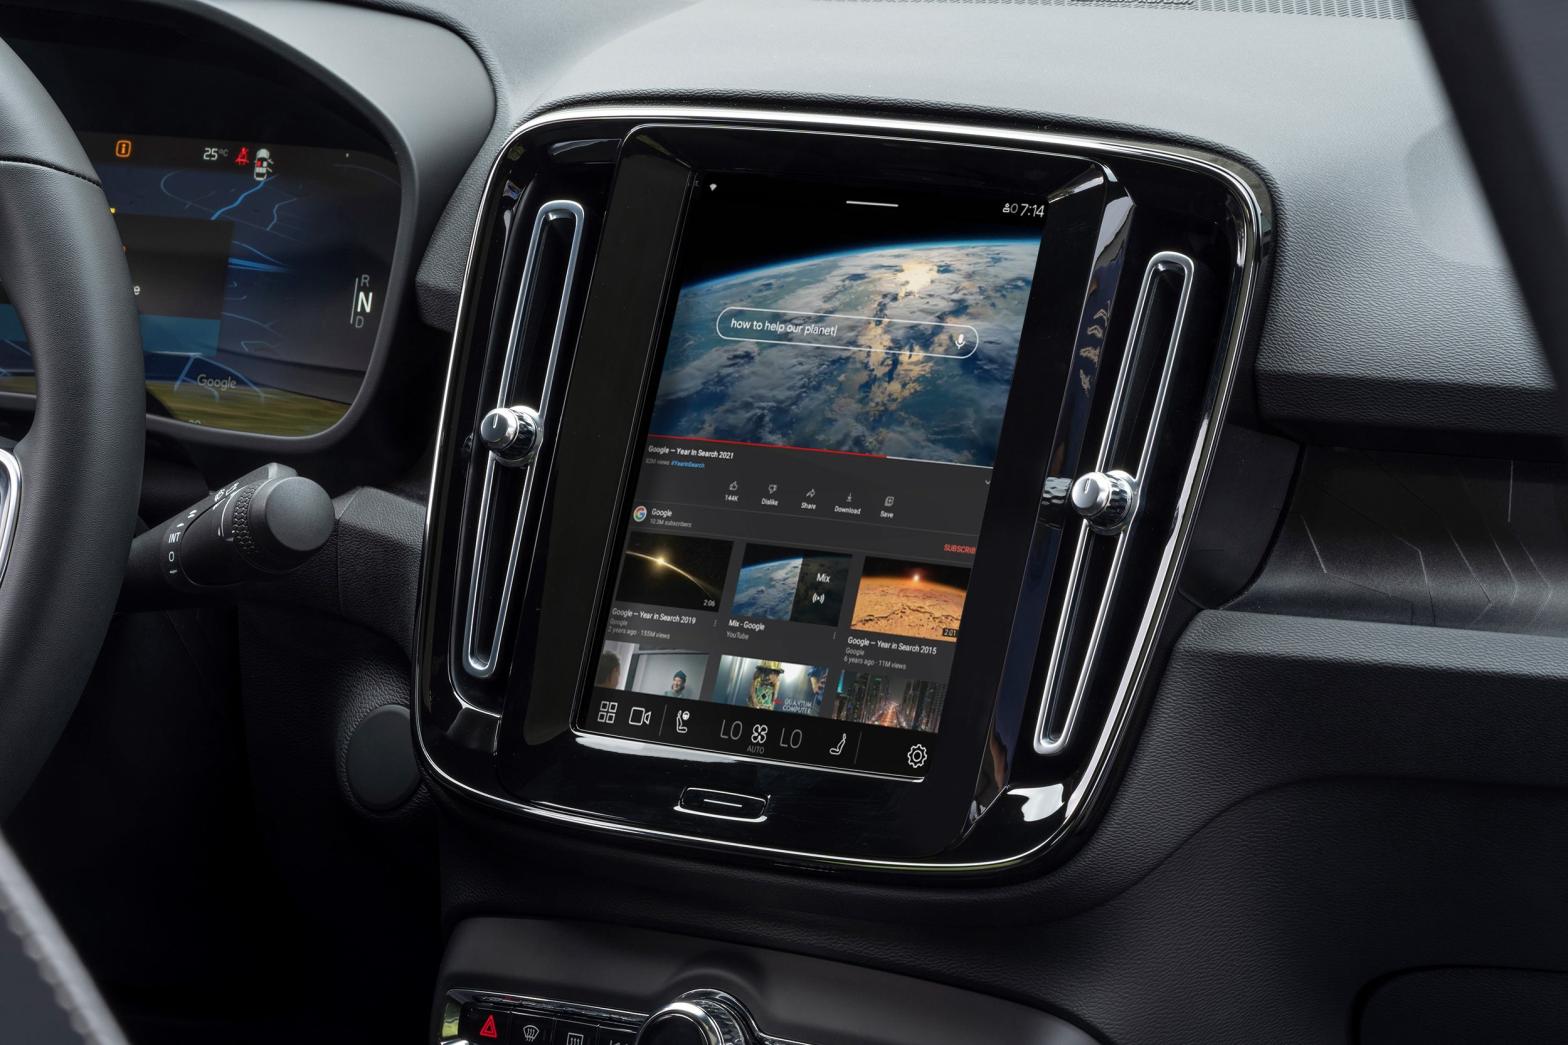 Later this year, Volvos with Android Automotive OS will offer YouTube in the dash — but only while you're parked. (Image: Google)